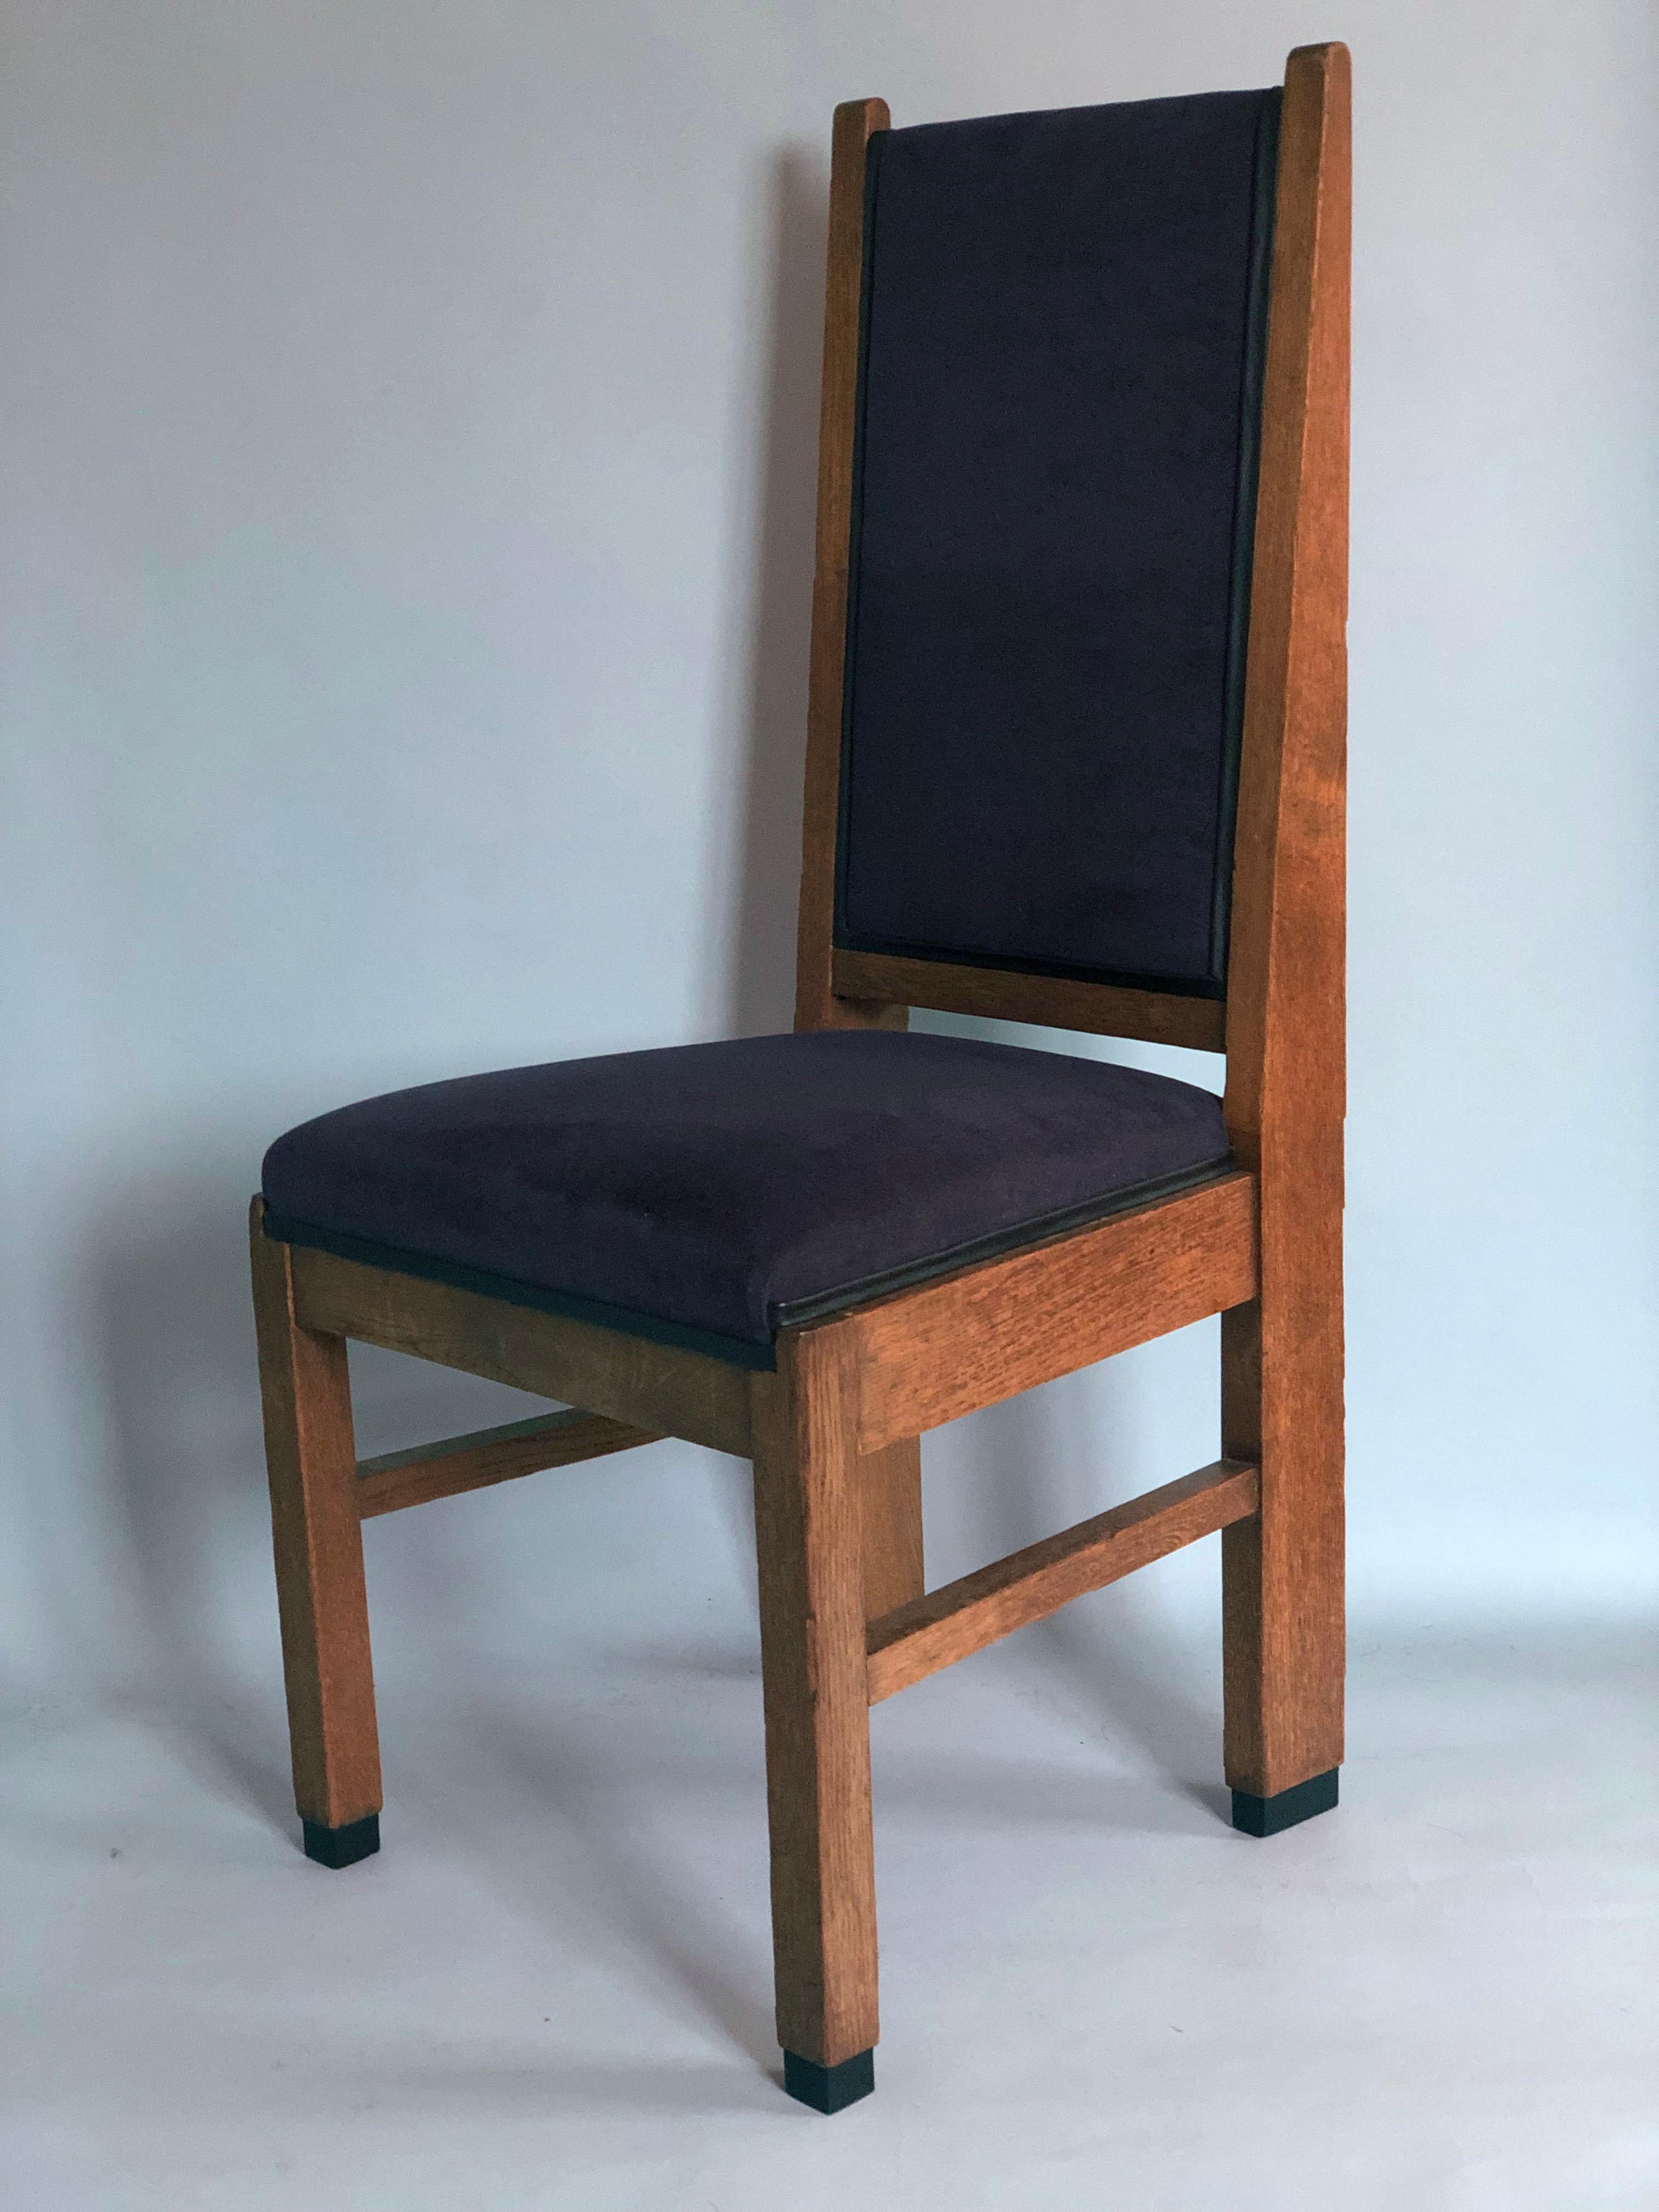 Art Deco design dining chairs from The Netherlands. Frits Spanjaard for 'The Hague School' 1930s. The 2 high-quality chairs with a high back have beautiful features, have been carved and re-waxed. The purple fabric of the seat and back is from a